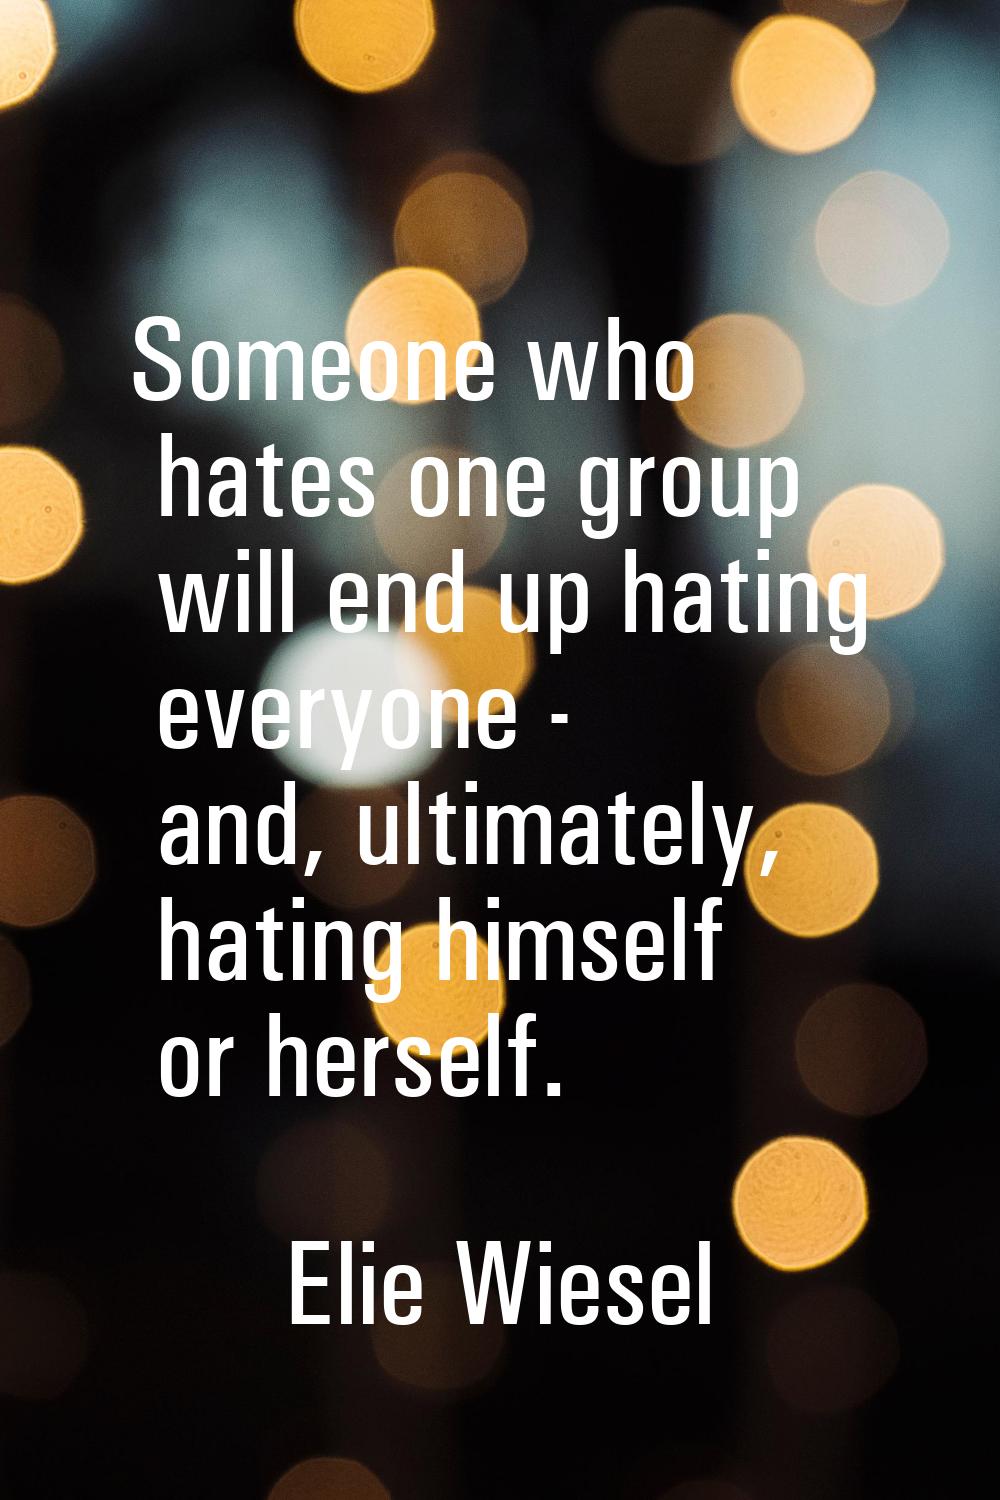 Someone who hates one group will end up hating everyone - and, ultimately, hating himself or hersel